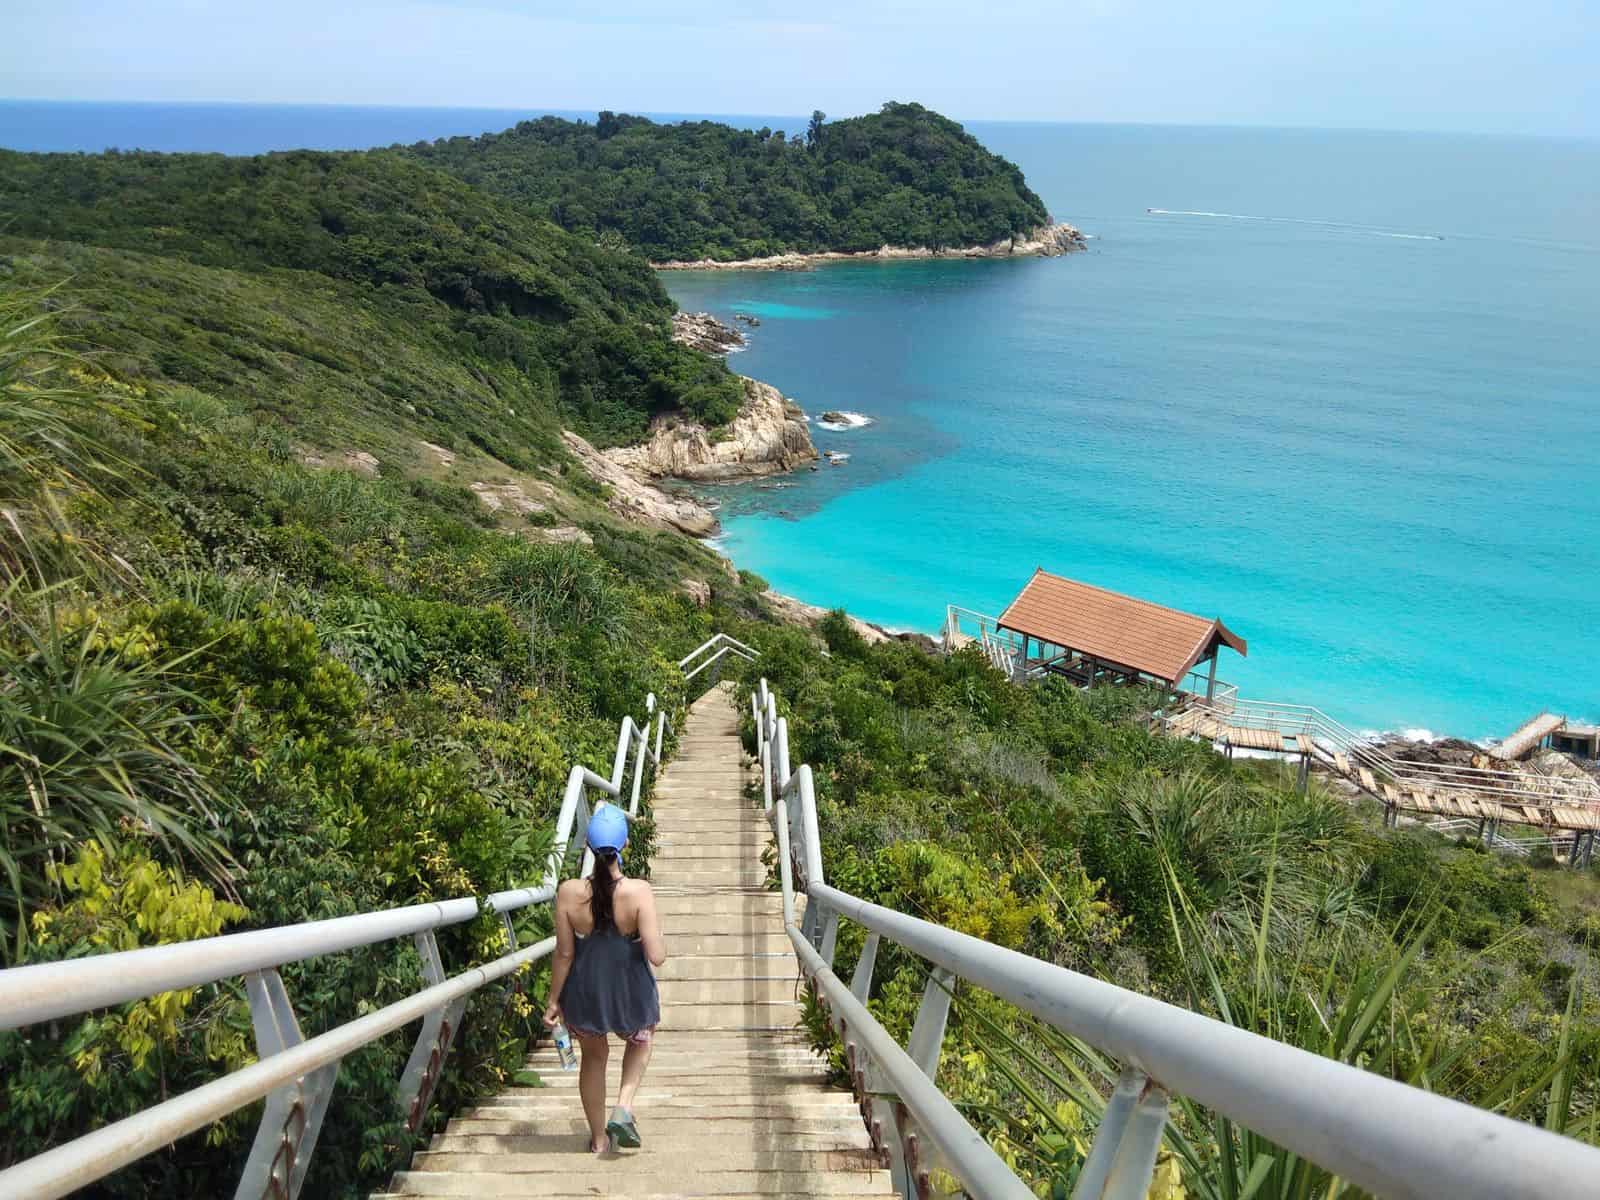 Top things to do in Malaysia's Perhentian Islands.